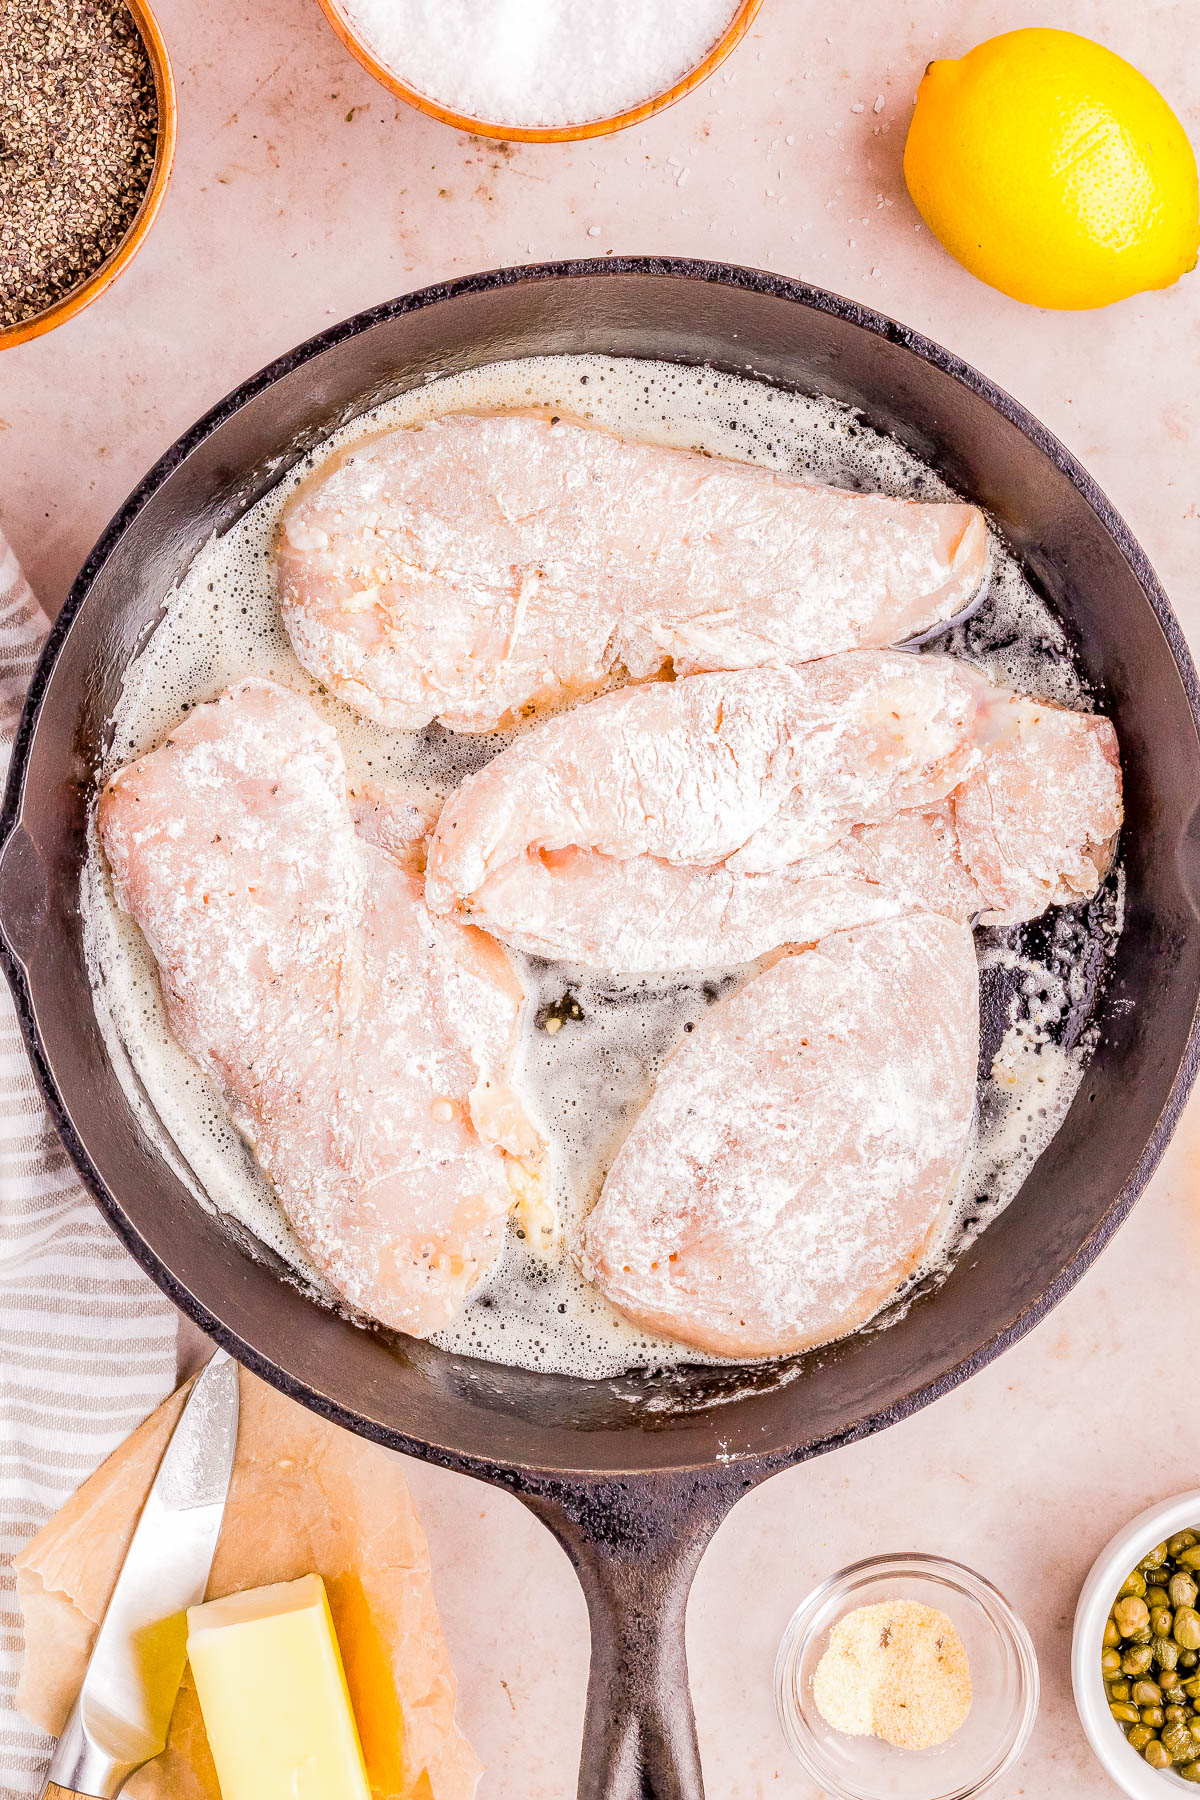 Raw chicken breasts in a seasoned flour coating being prepared for cooking in a cast-iron skillet, surrounded by ingredients like lemon, spices, and butter.